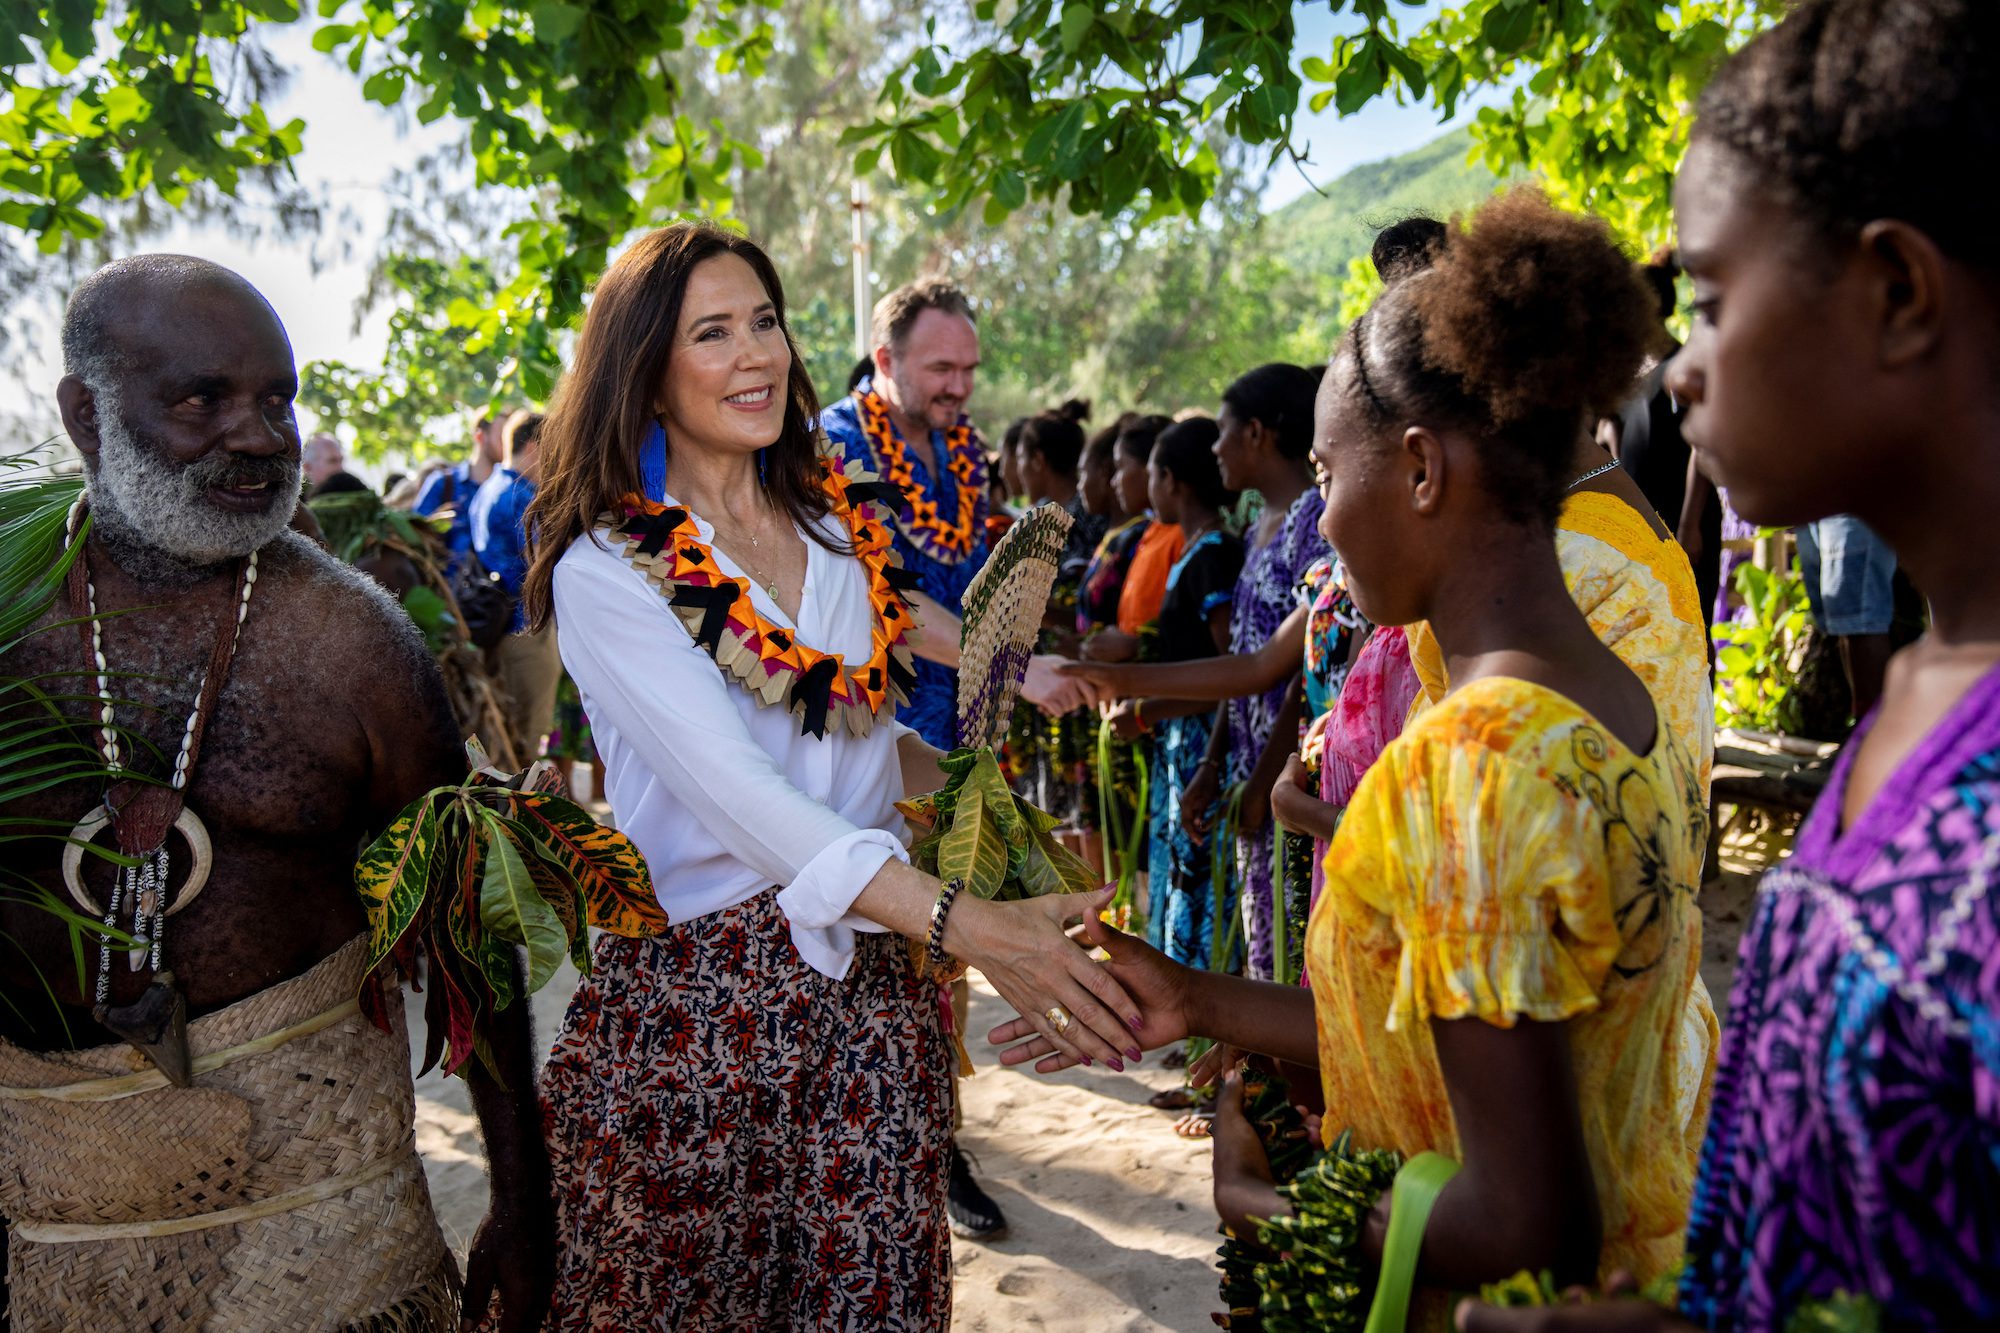 Island's inhabitants welcome Danish Crown Princess Mary and Dan Jorgensen, Minister for Development Cooperation and Global Climate Policy during their visit to Pele Island, to highlight the challenges that the local communities of the Pacific islands face in connection with climate change, in Vanuatu, April 23, 2023.  Ritzau Scanpix via REUTERS   